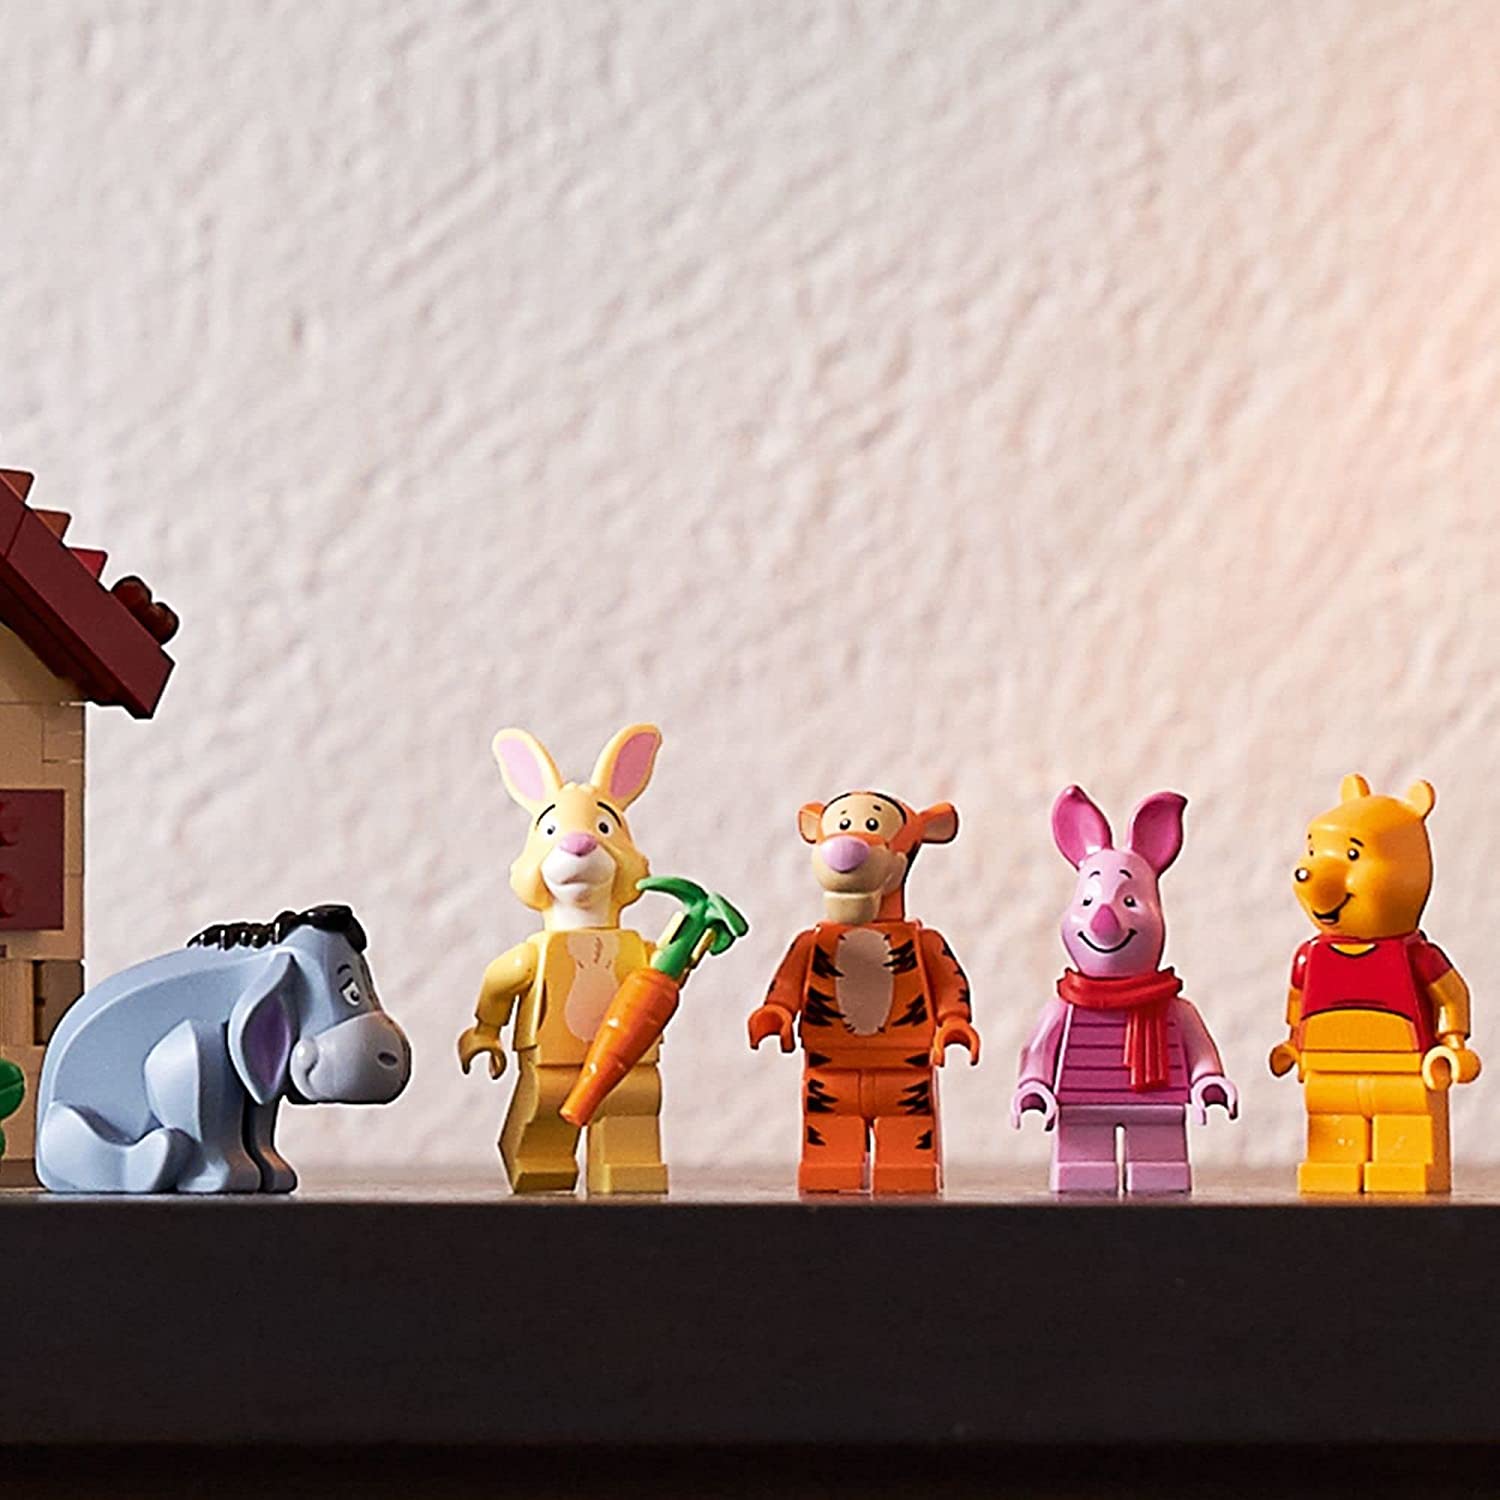 LEGO Ideas Disney Winnie the Pooh 21326 Building Set - with Piglet, Eeyore and Pooh Bear Minifigure - image 5 of 8